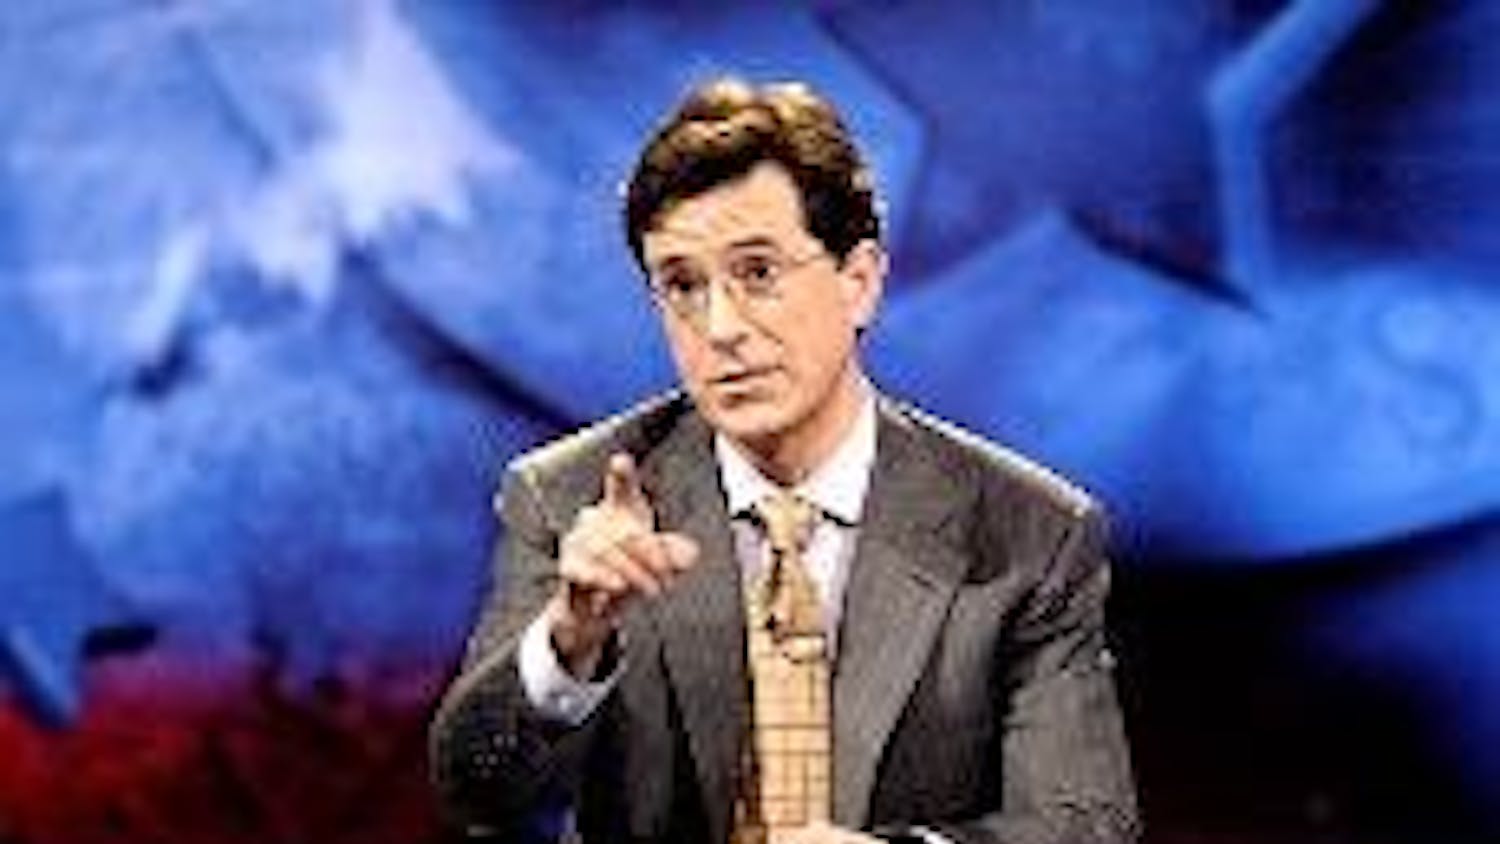 AMERICAN HERO- Stephen Colbert spoofs famous news commentators by delivering news in irreverent ways, punctuating his presentations with special segments such as "The Word" and "Better Know A District" and was recently denied presidential candidacy